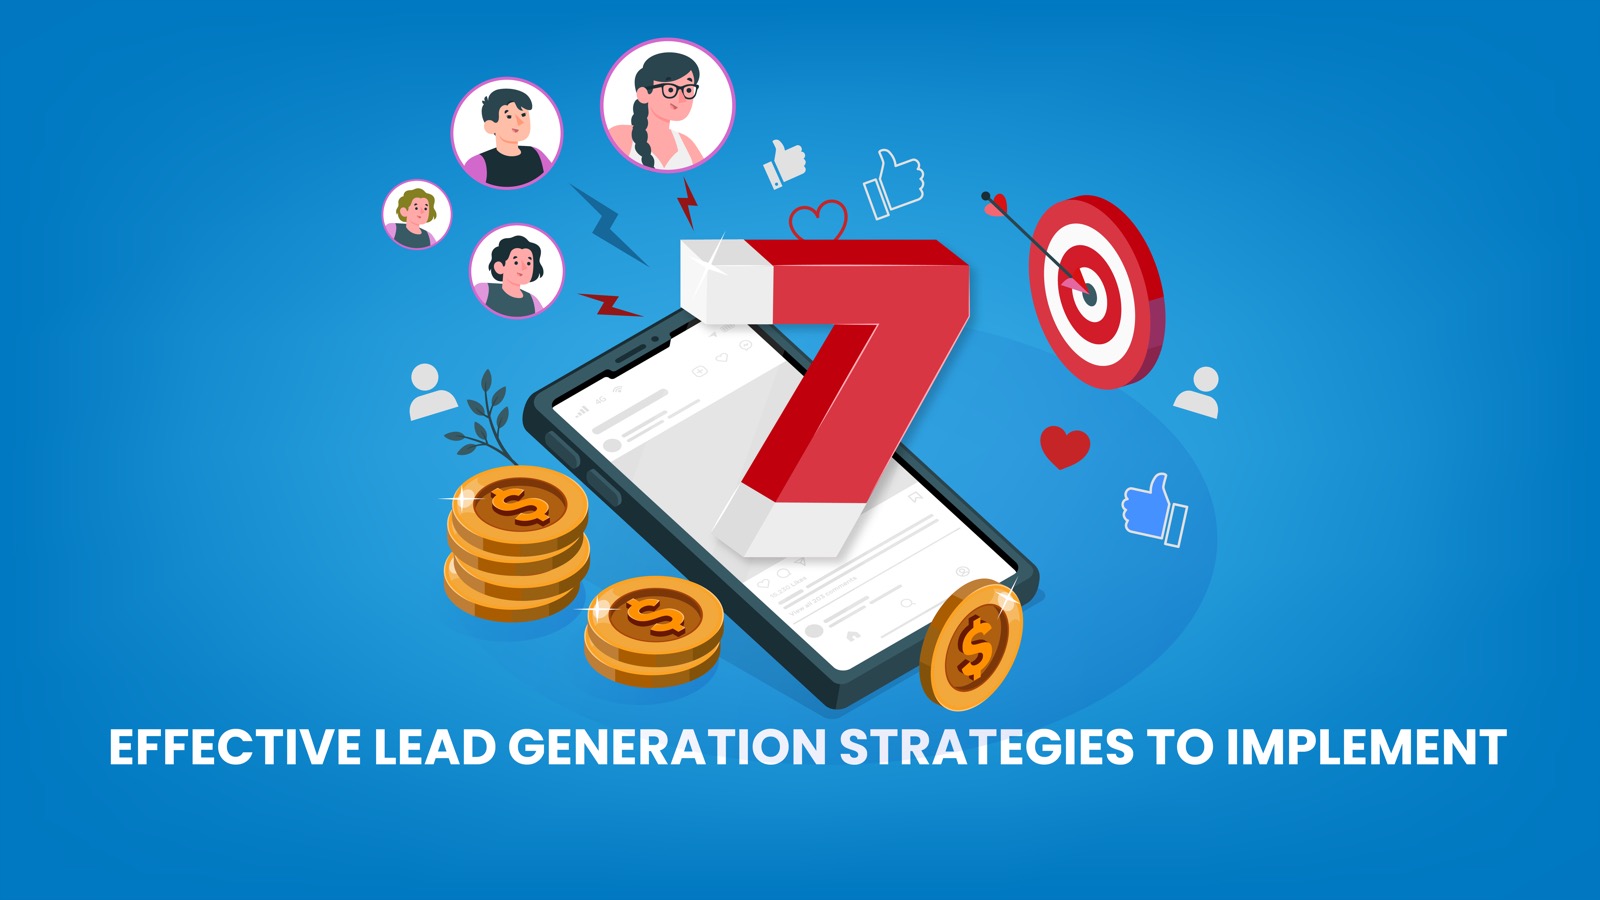 7 EFFECTIVE LEAD GENERATION STRATEGIES TO IMPLEMENT